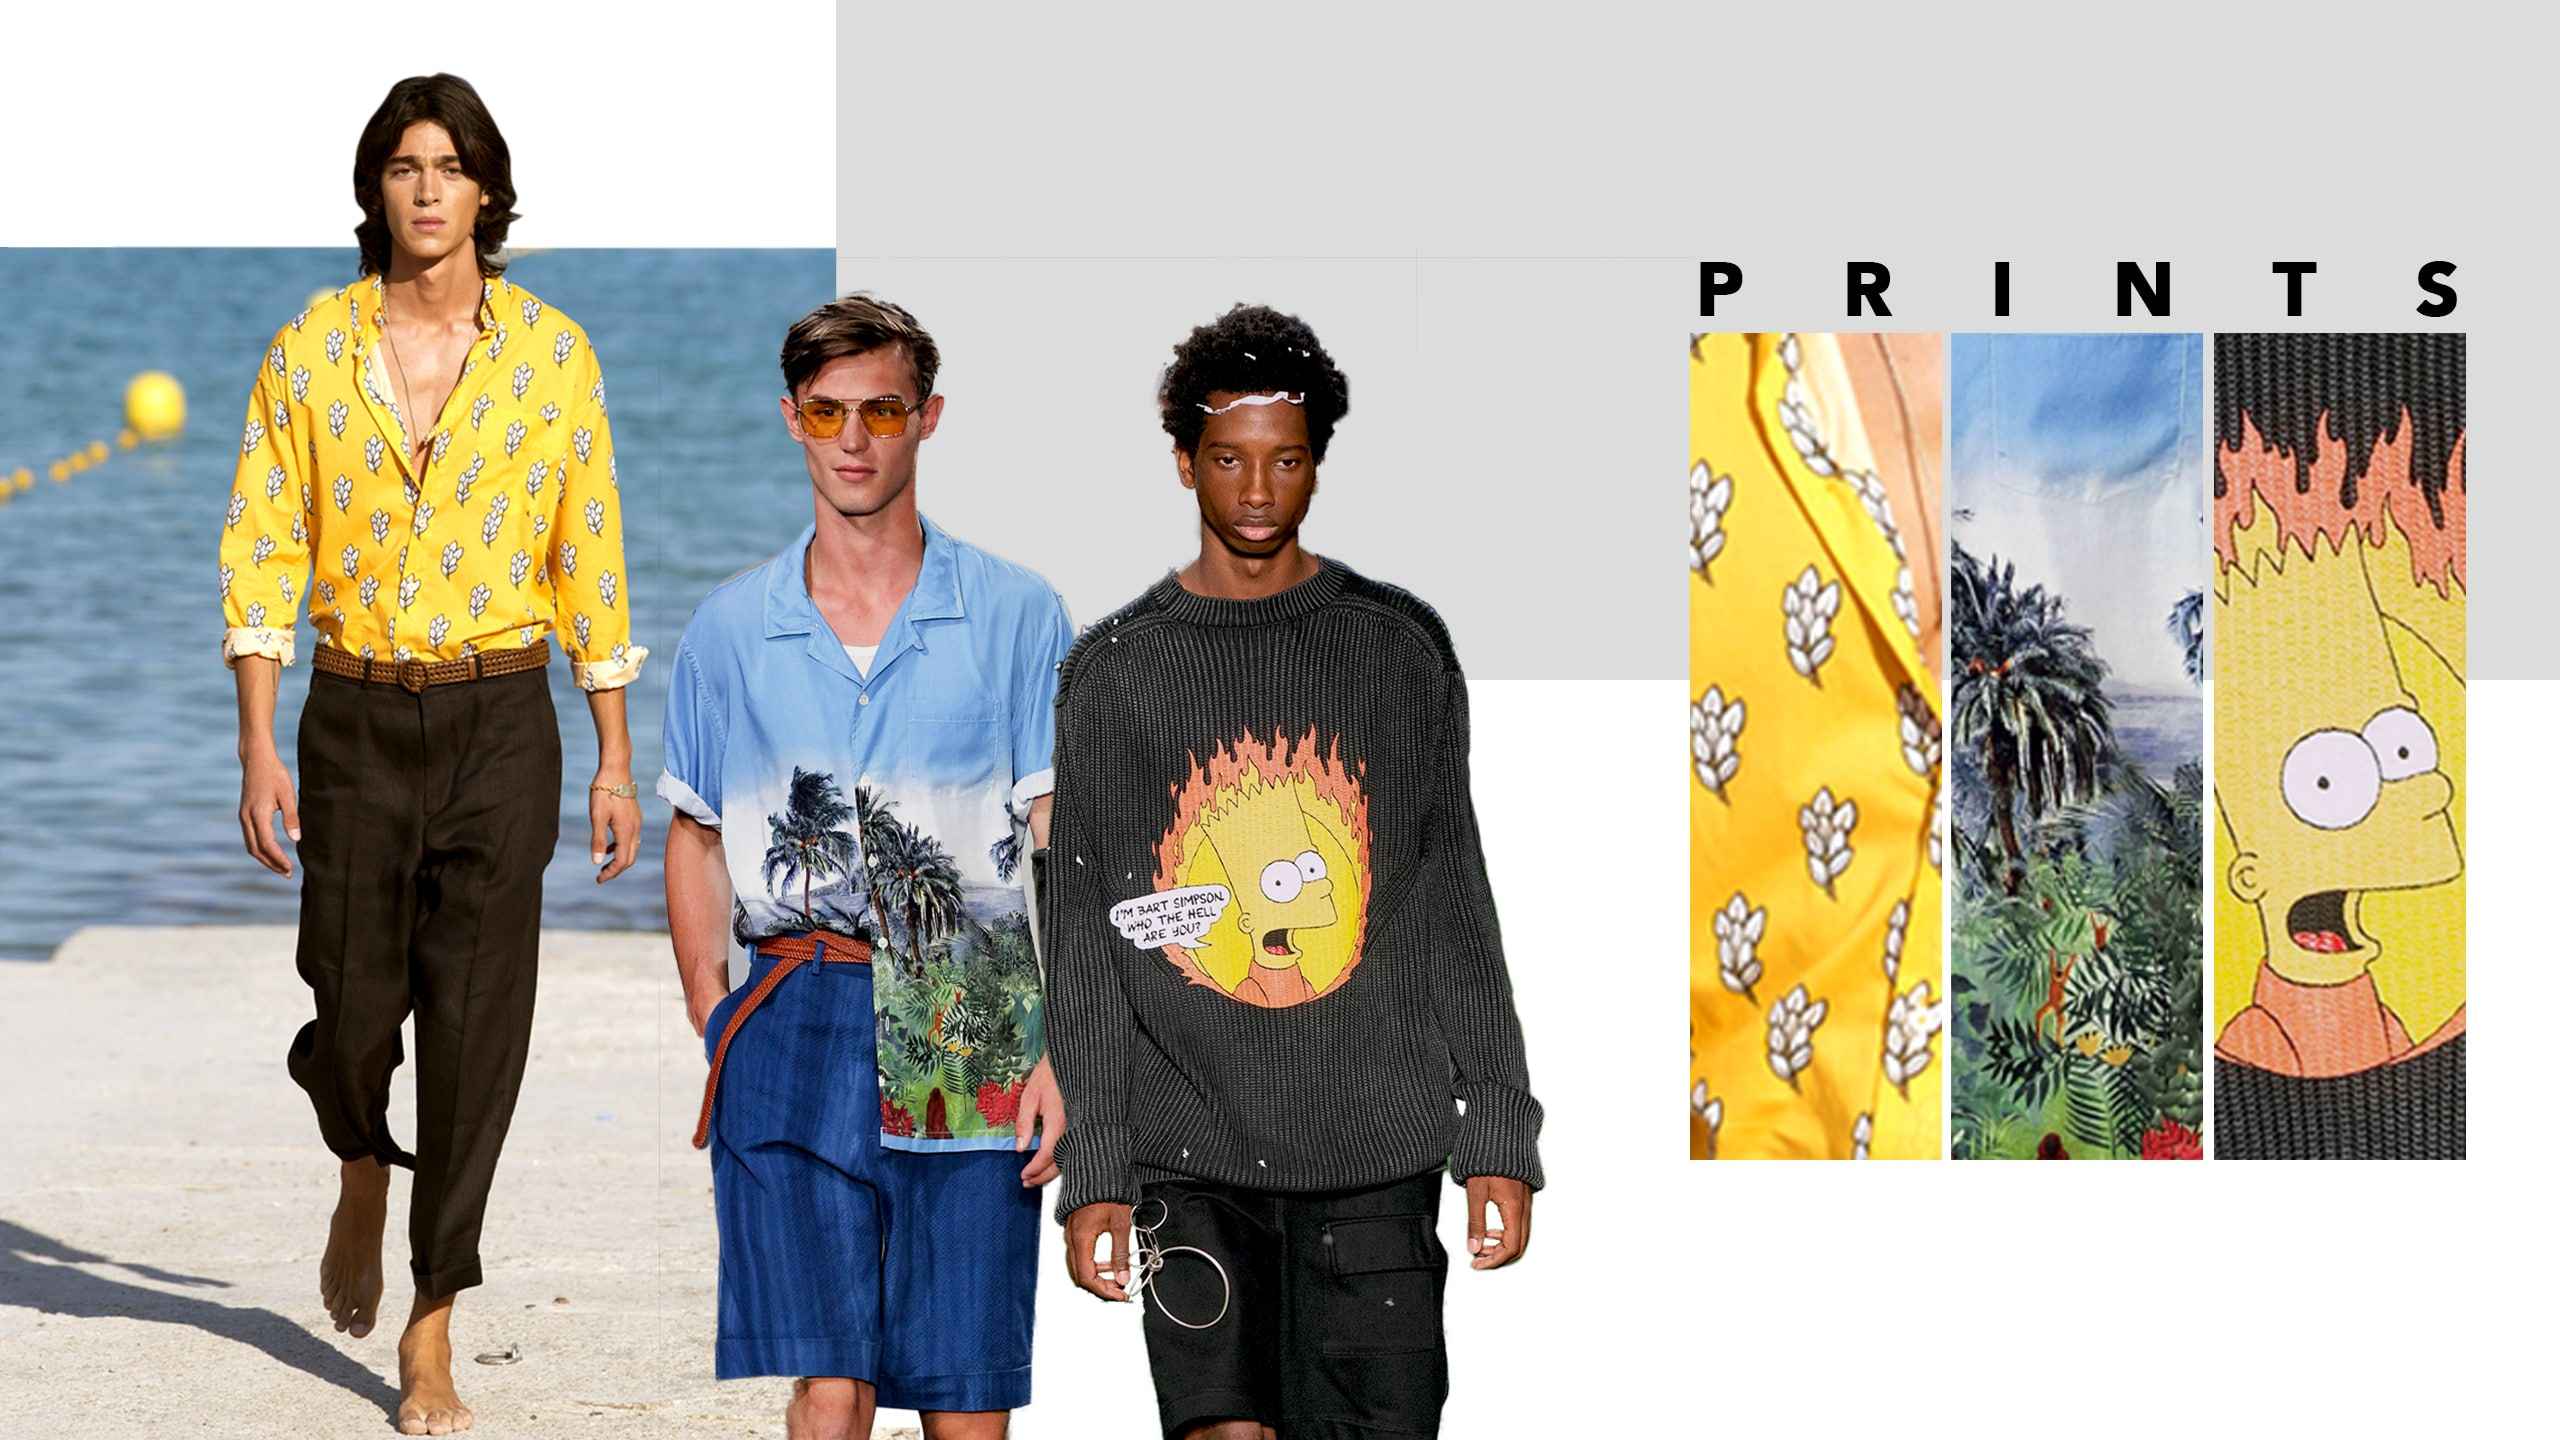 From Tie &amp; Dye to The Simpsons: Print Trends for Menswear in Spring 2019